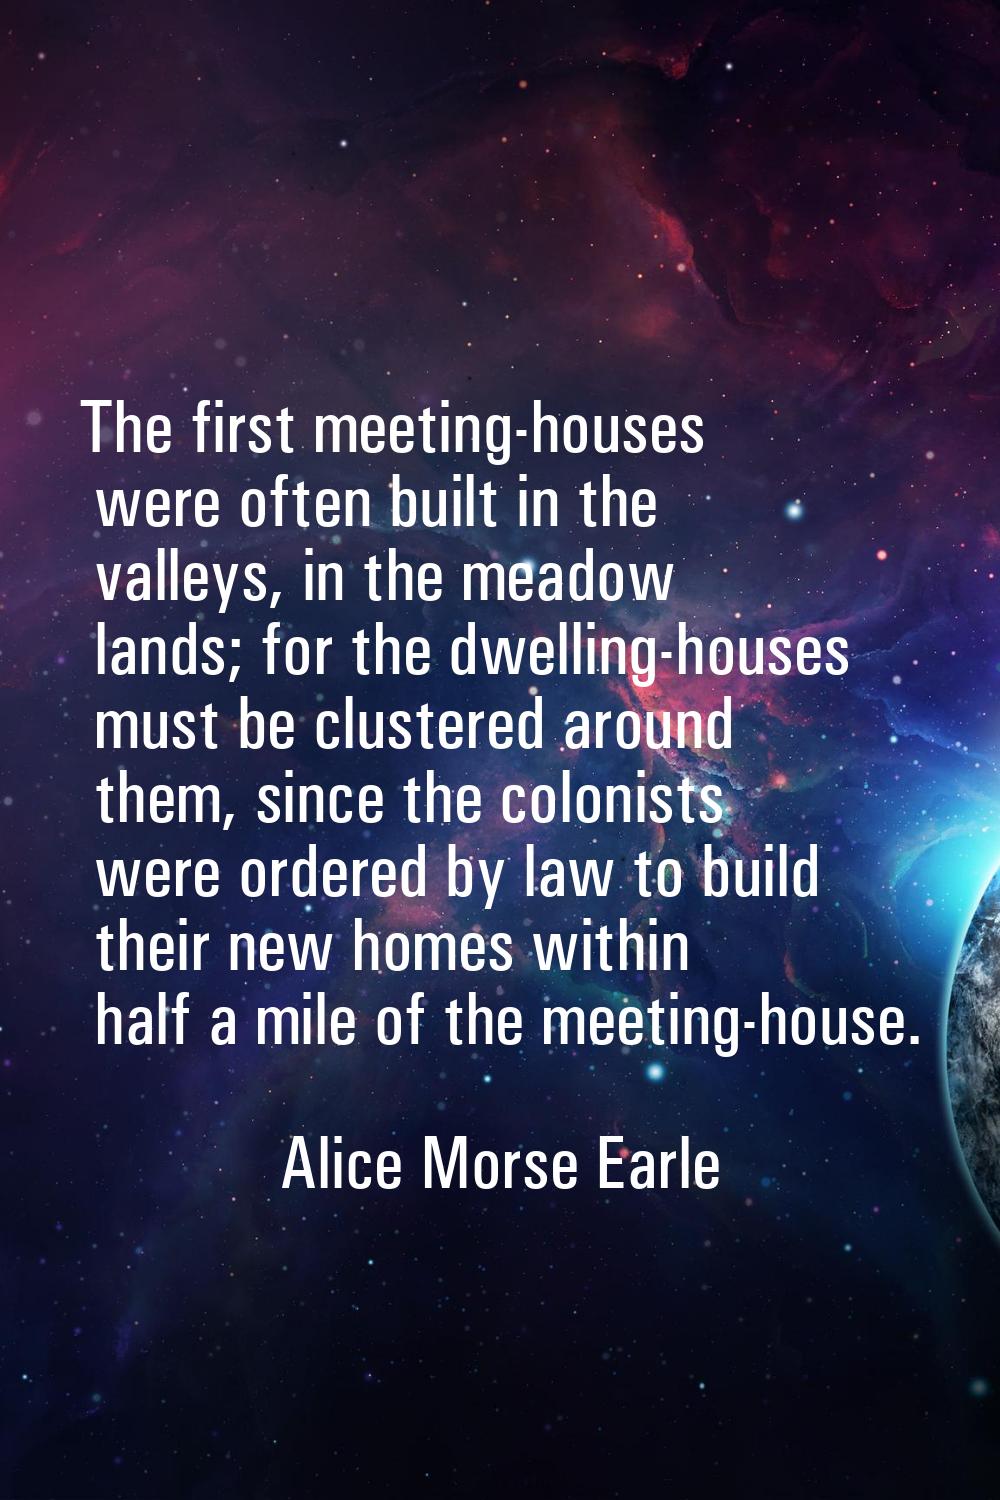 The first meeting-houses were often built in the valleys, in the meadow lands; for the dwelling-hou